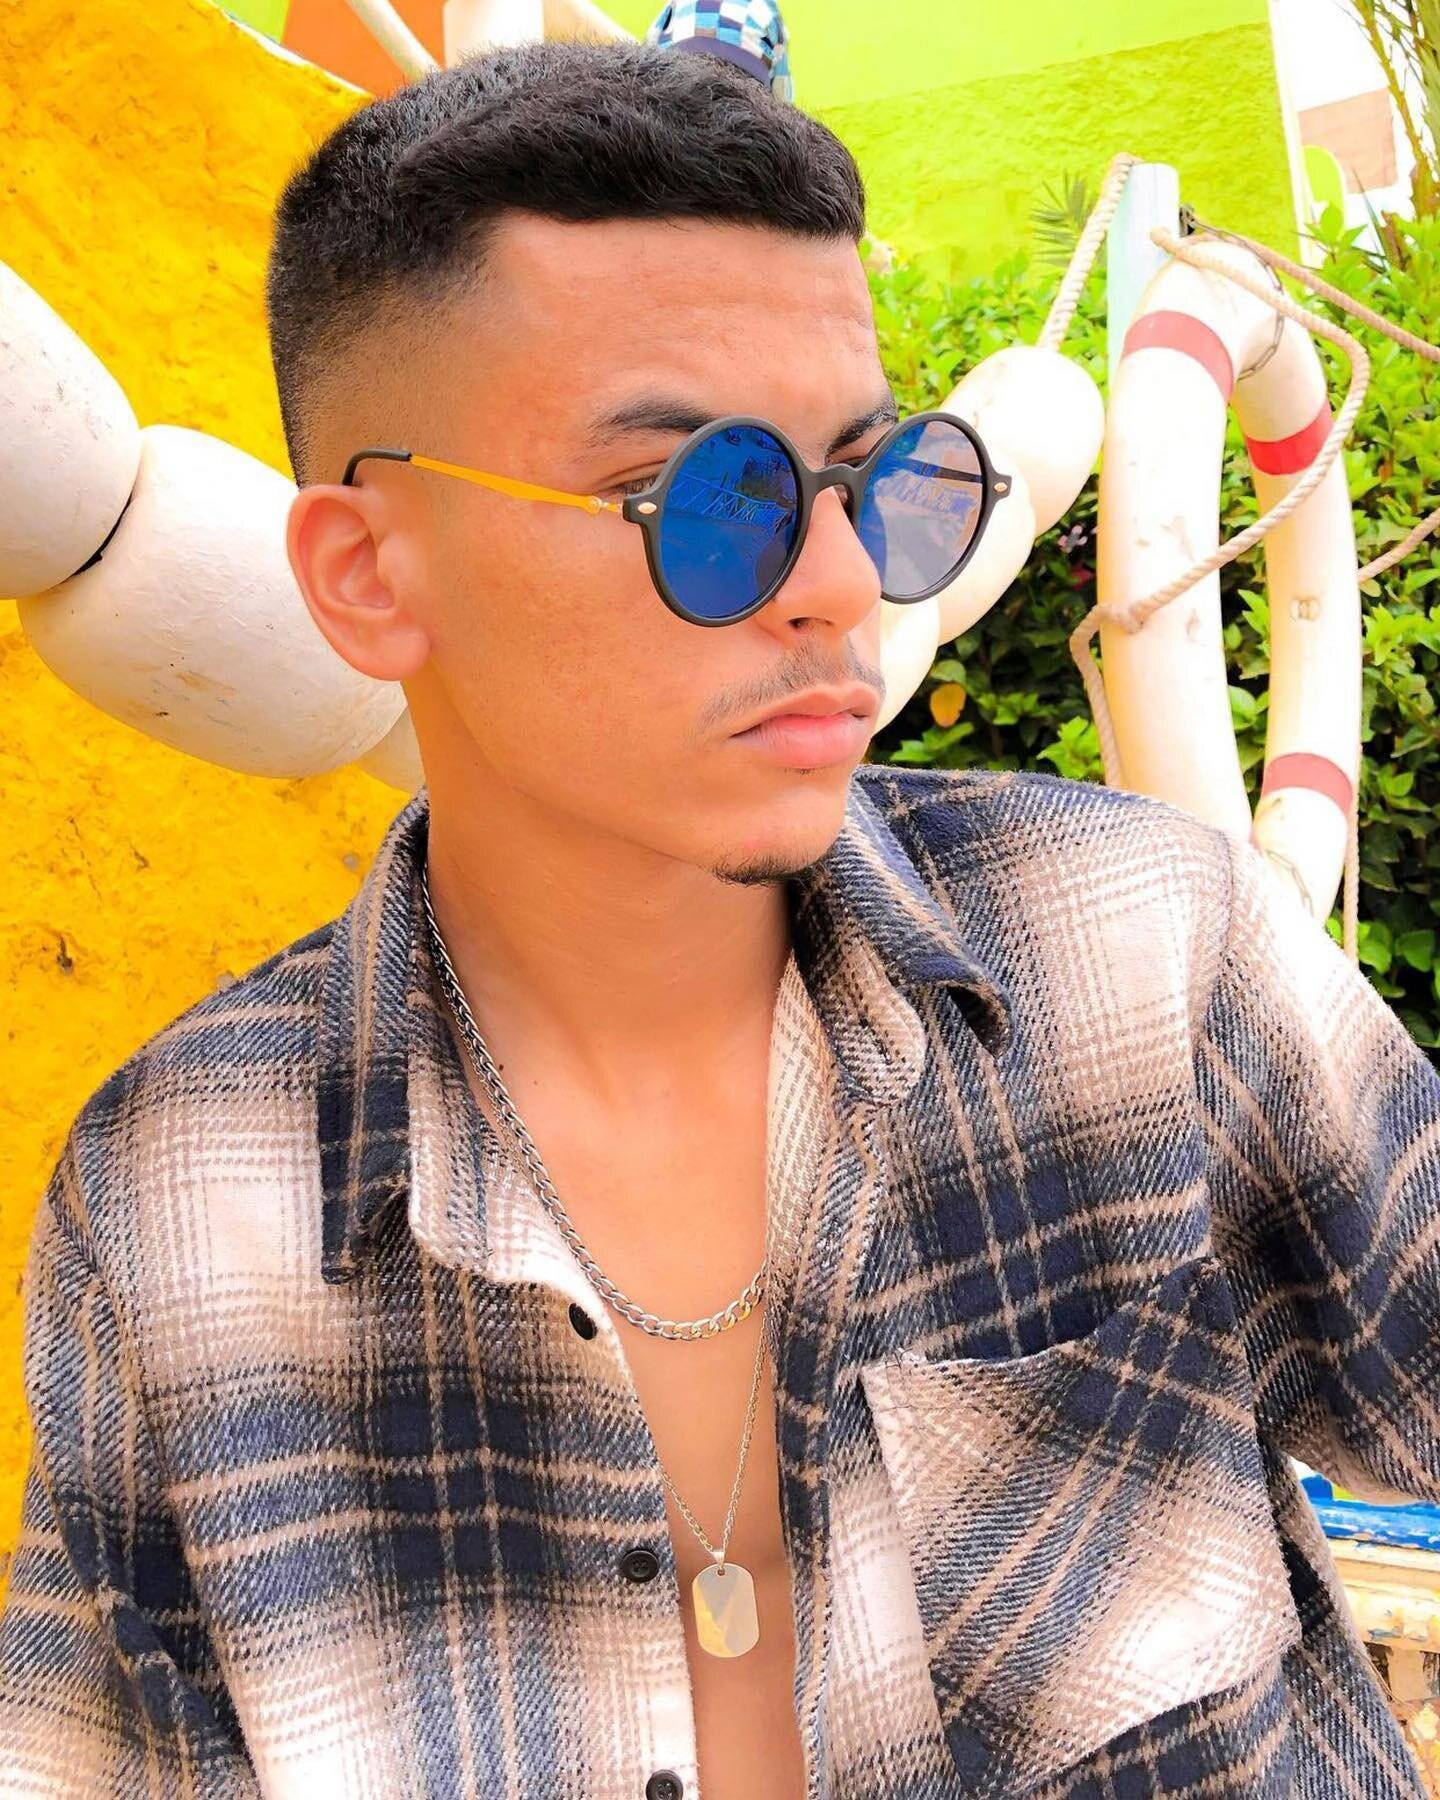 🕶: &lsquo;Vortex&rsquo; by #VSHADES

📸: @a__medd

💰: USE CODE: FREESHIPPING

🔗: LINK IN BIO

.
.
.
.
.
.
.
.
.
.
.
#sunglasses #shades #Sunnies #fashion #style #Summer #signaturesunglasses #trendy #jounalist #oceanside #losangeles #southerncalifo